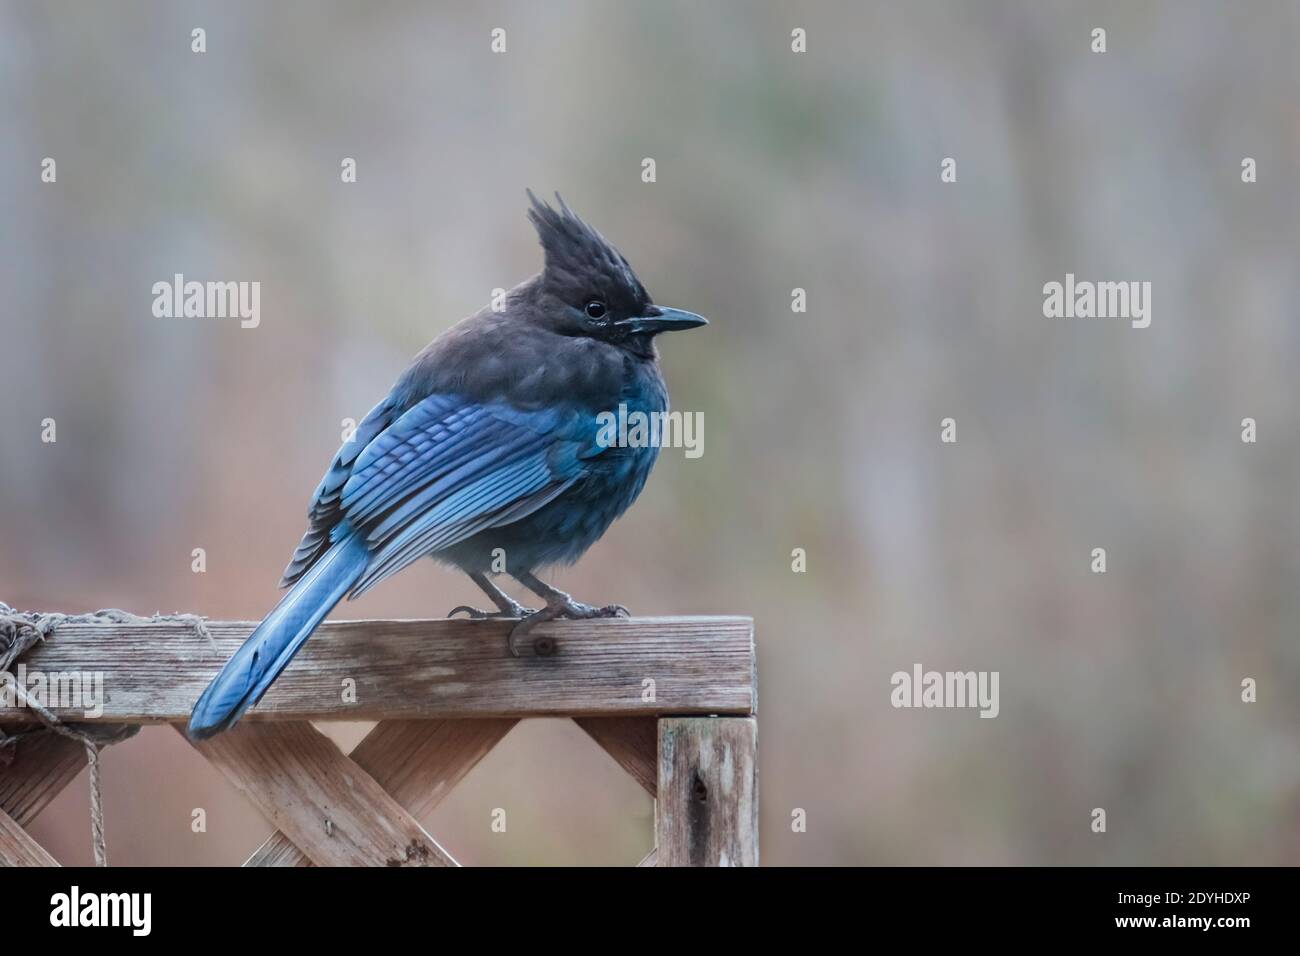 A colourful Steller's jay (Cyanocitta stelleri) keeps a watchful eye while perching on a bare wooden trellis in late winter, with blurred background. Stock Photo